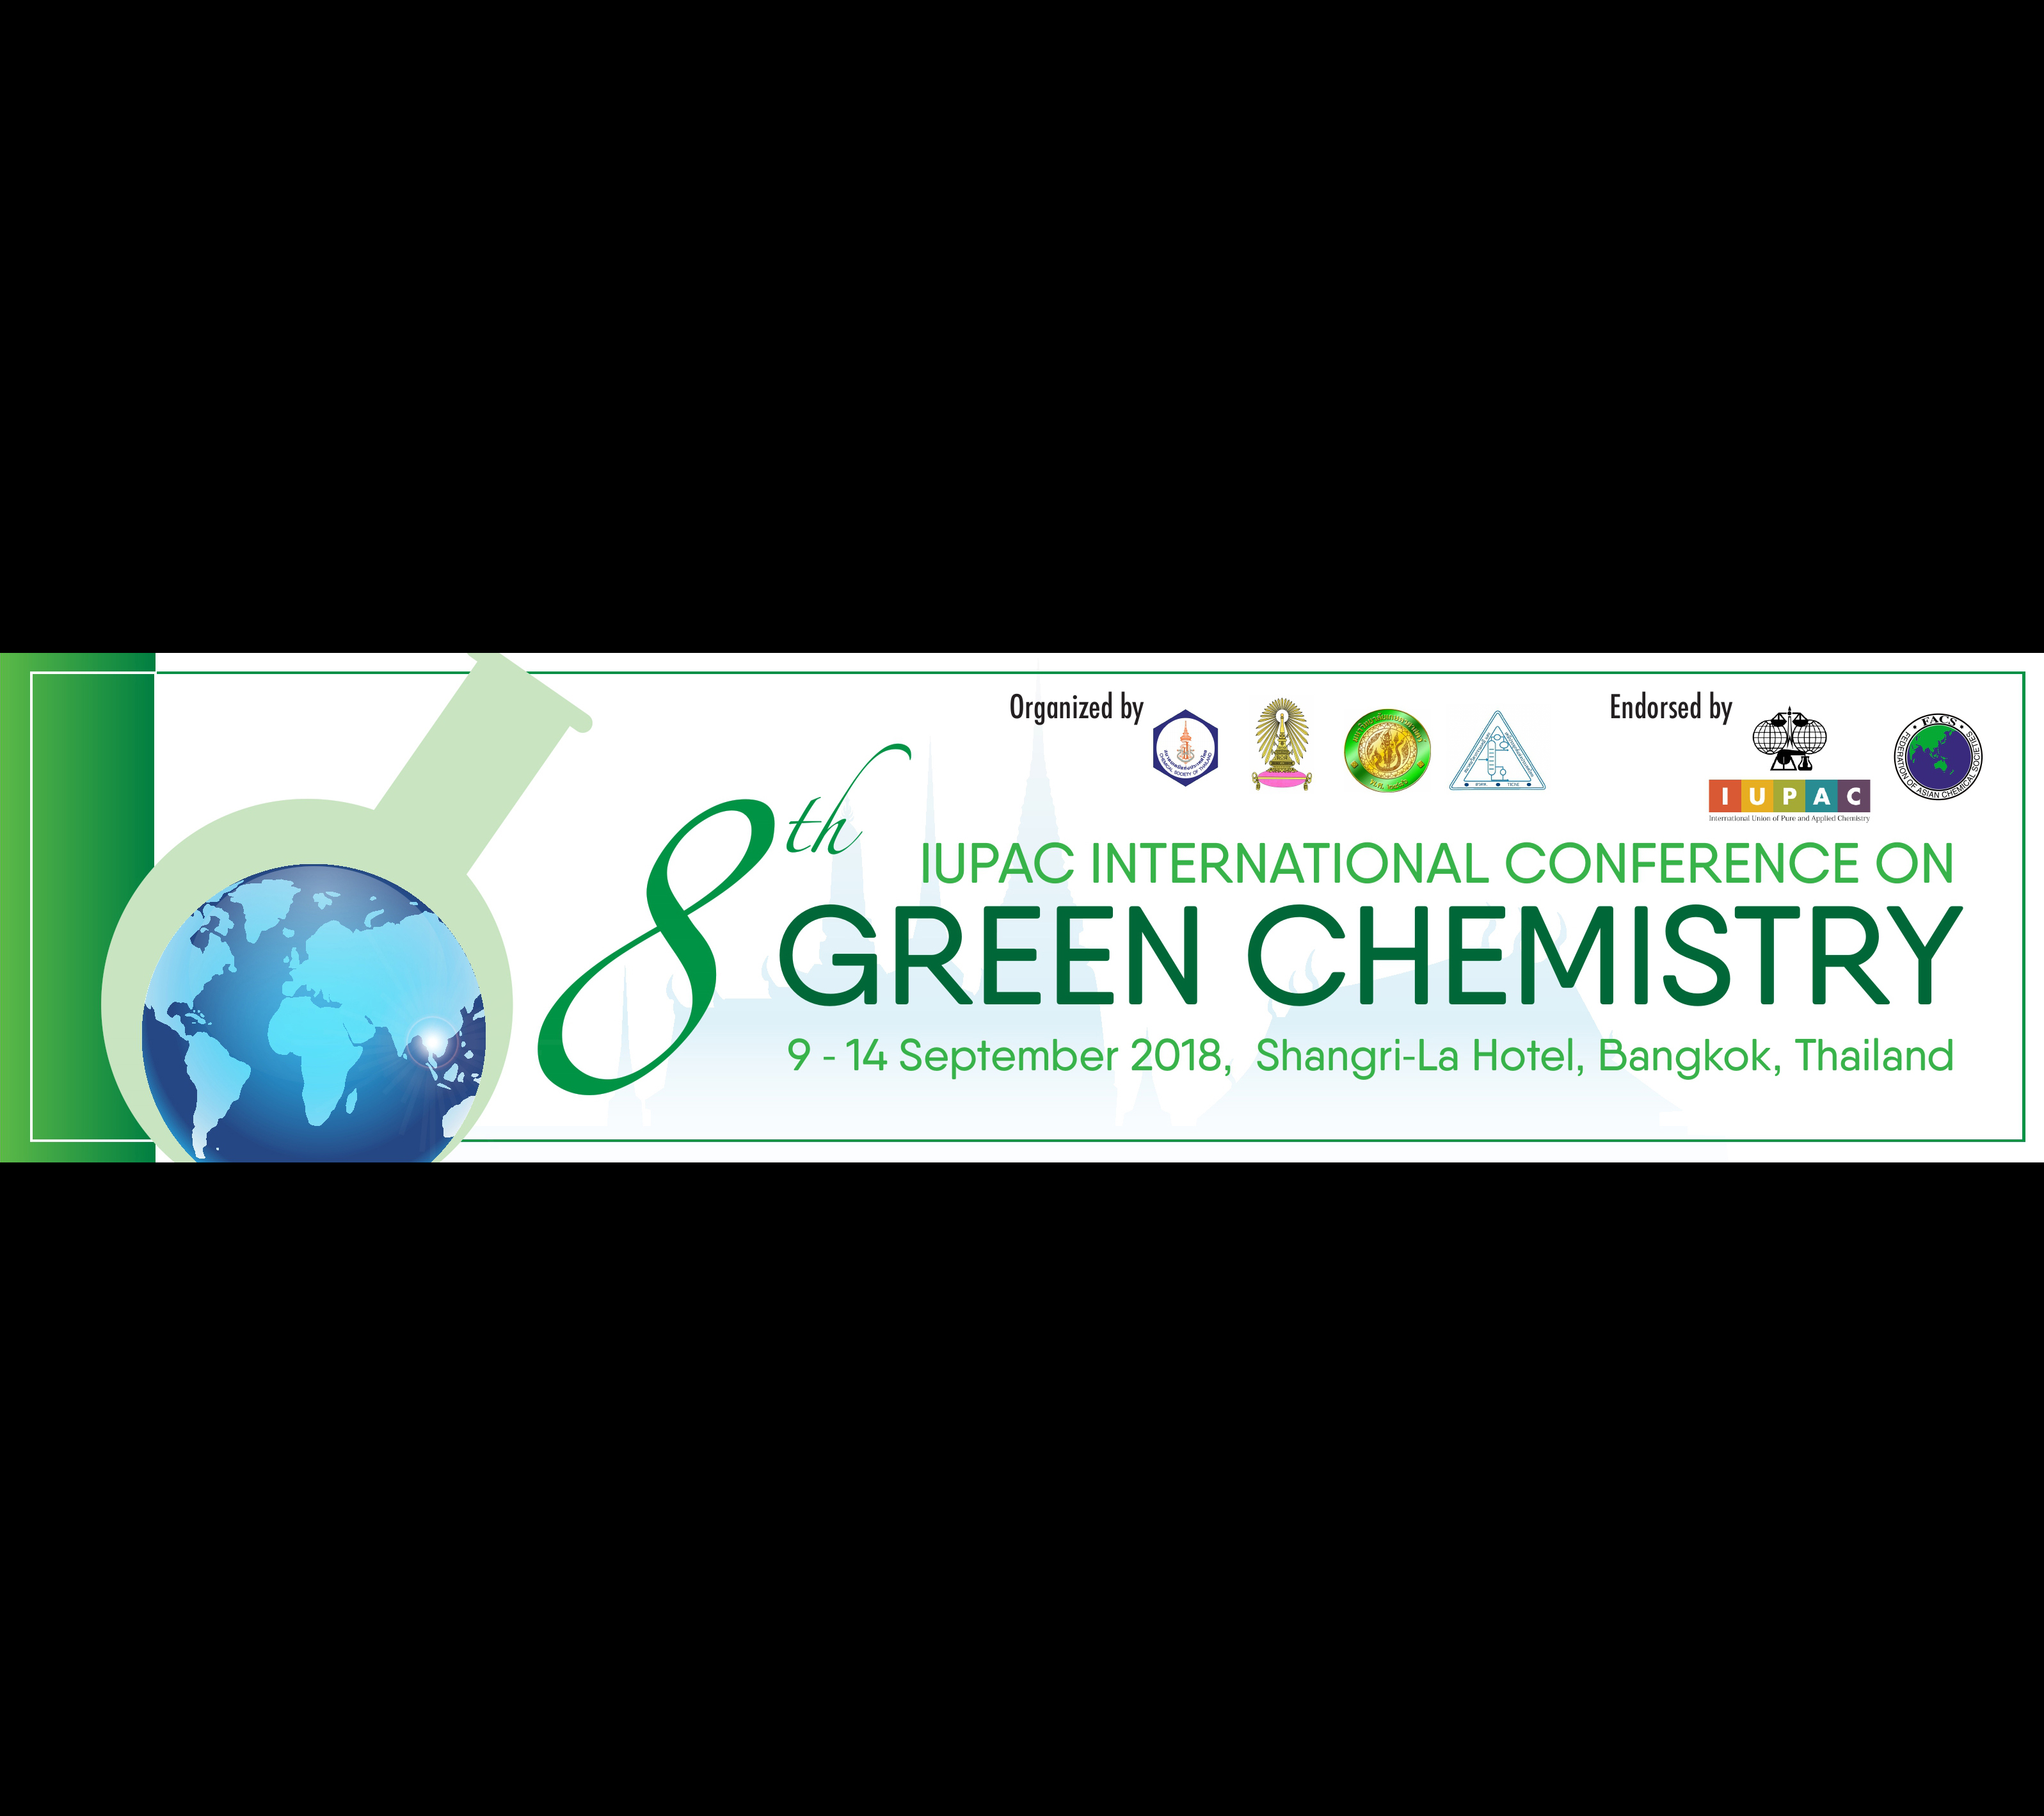 8th IUPAC International Conference on Green Chemistry